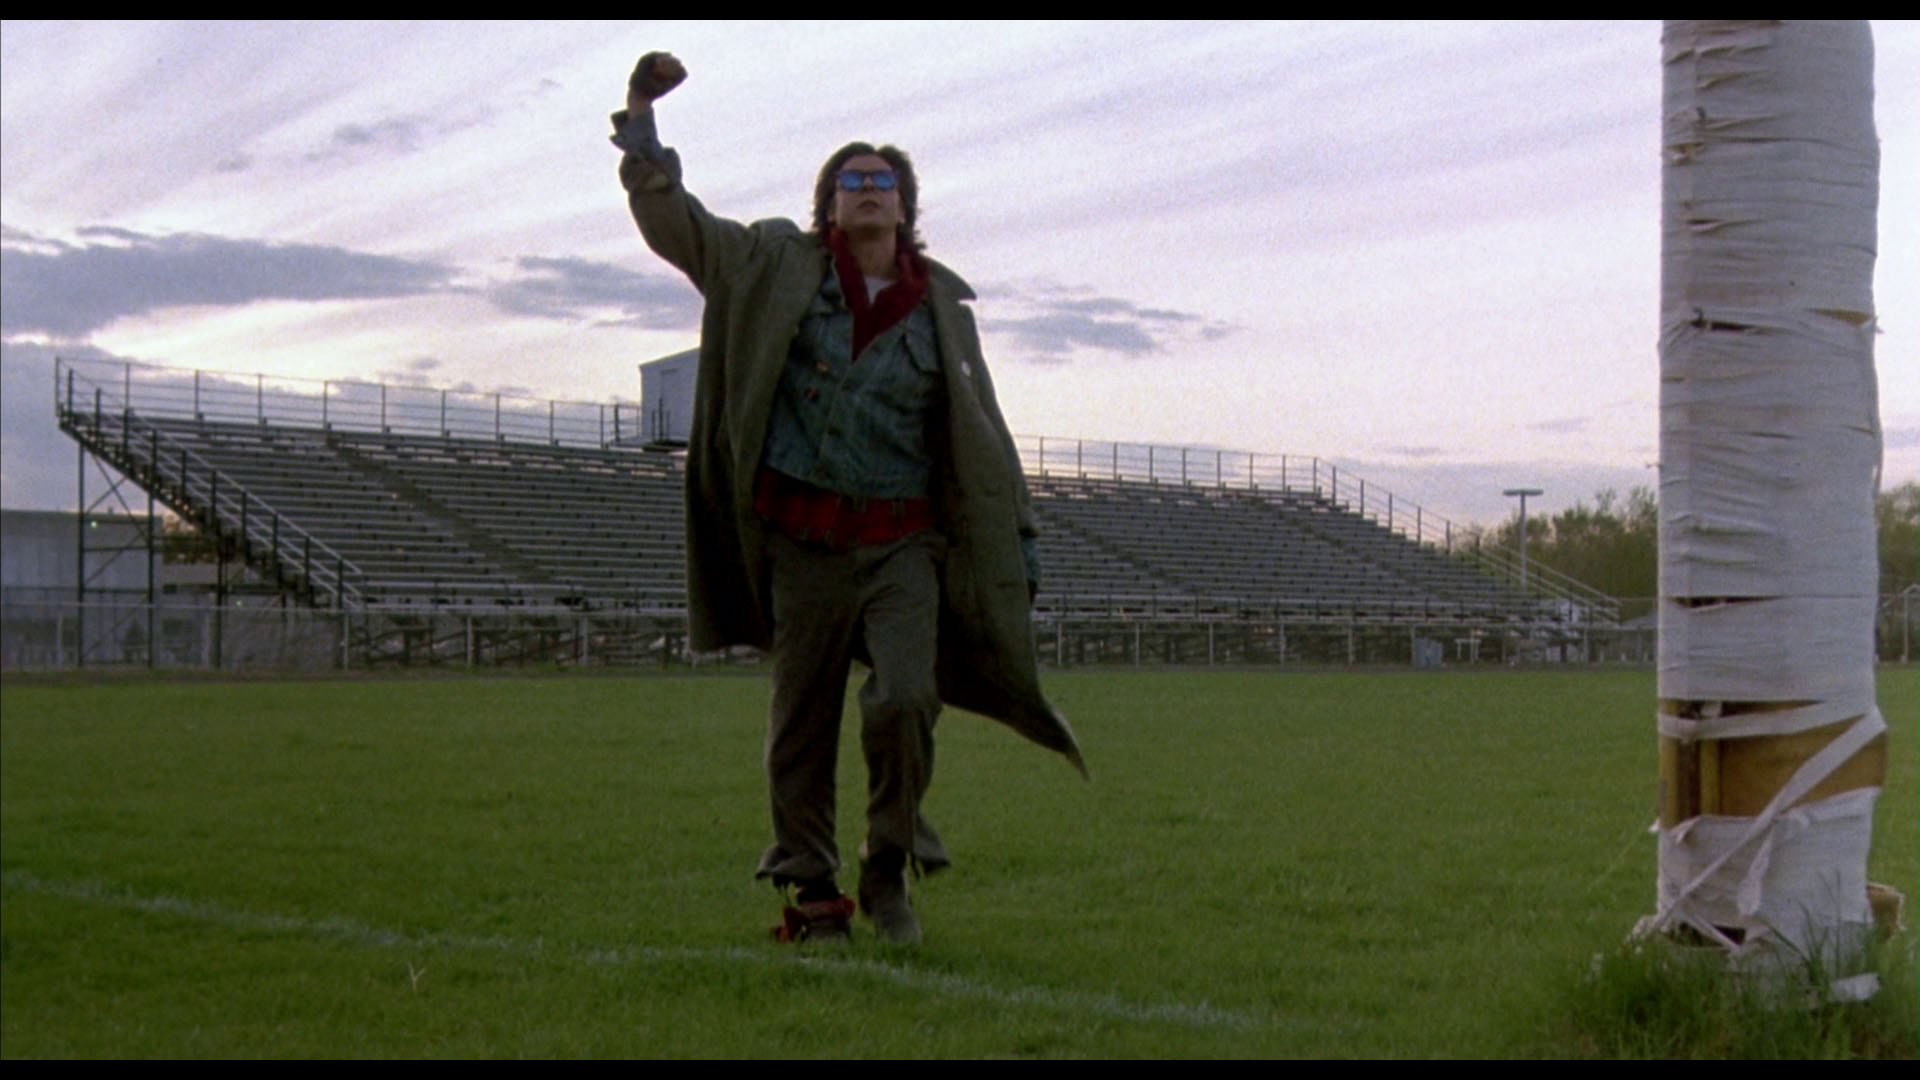 The Universal Message of The Breakfast Club